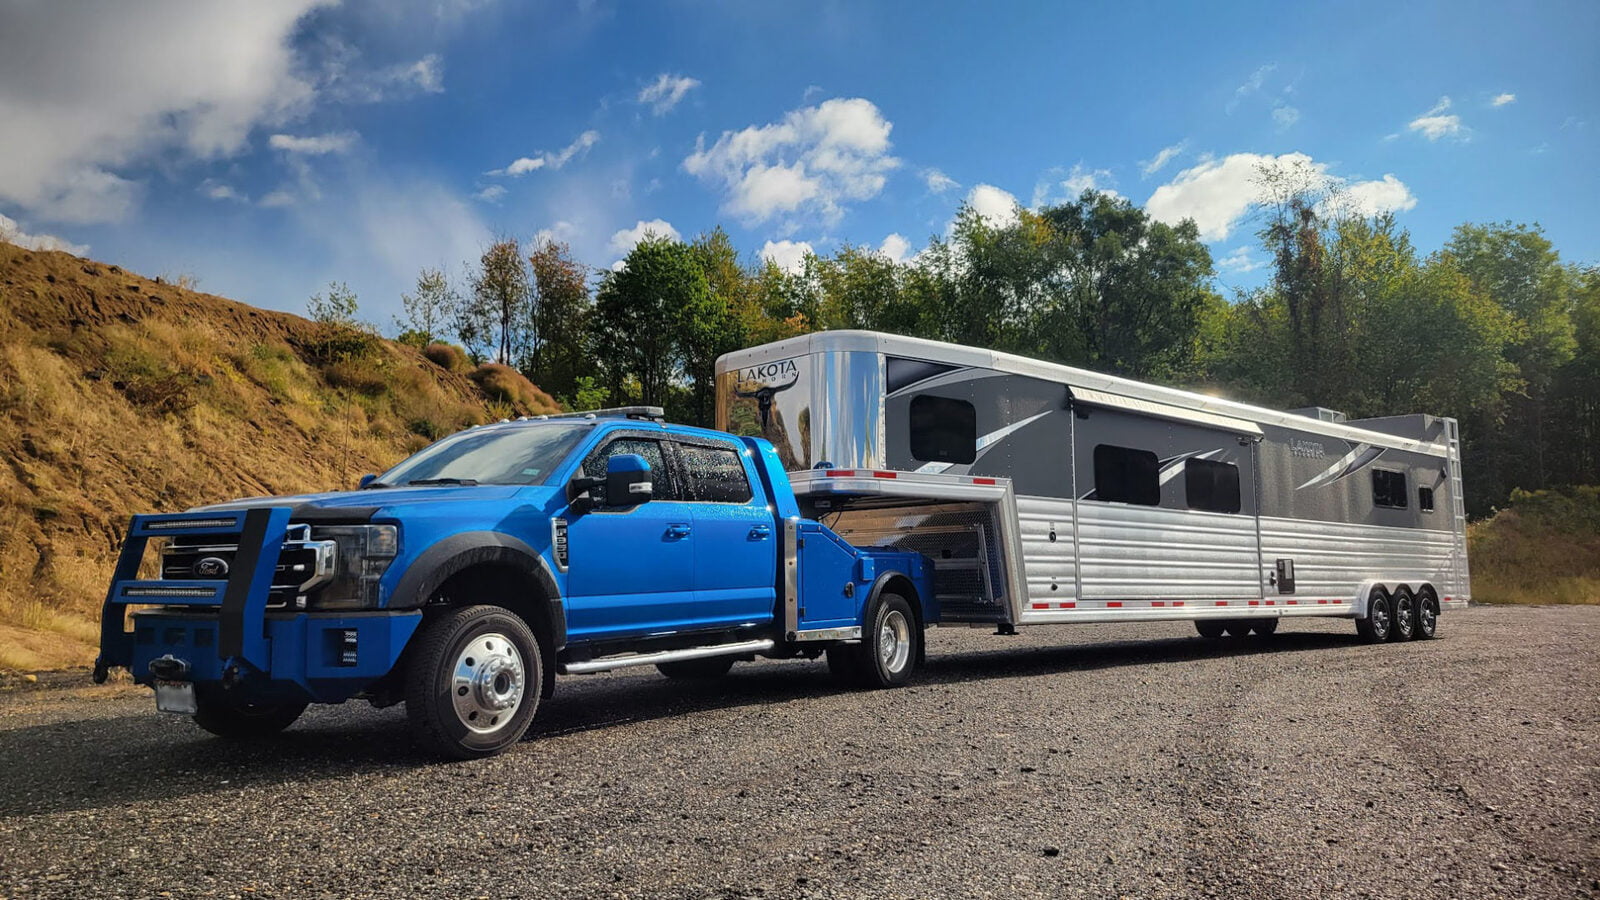 A Ford F-550, configured as a fifth wheel RV hauler, efficiently towing a gooseneck horse trailer, demonstrating its versatility and power in hauling capabilities.